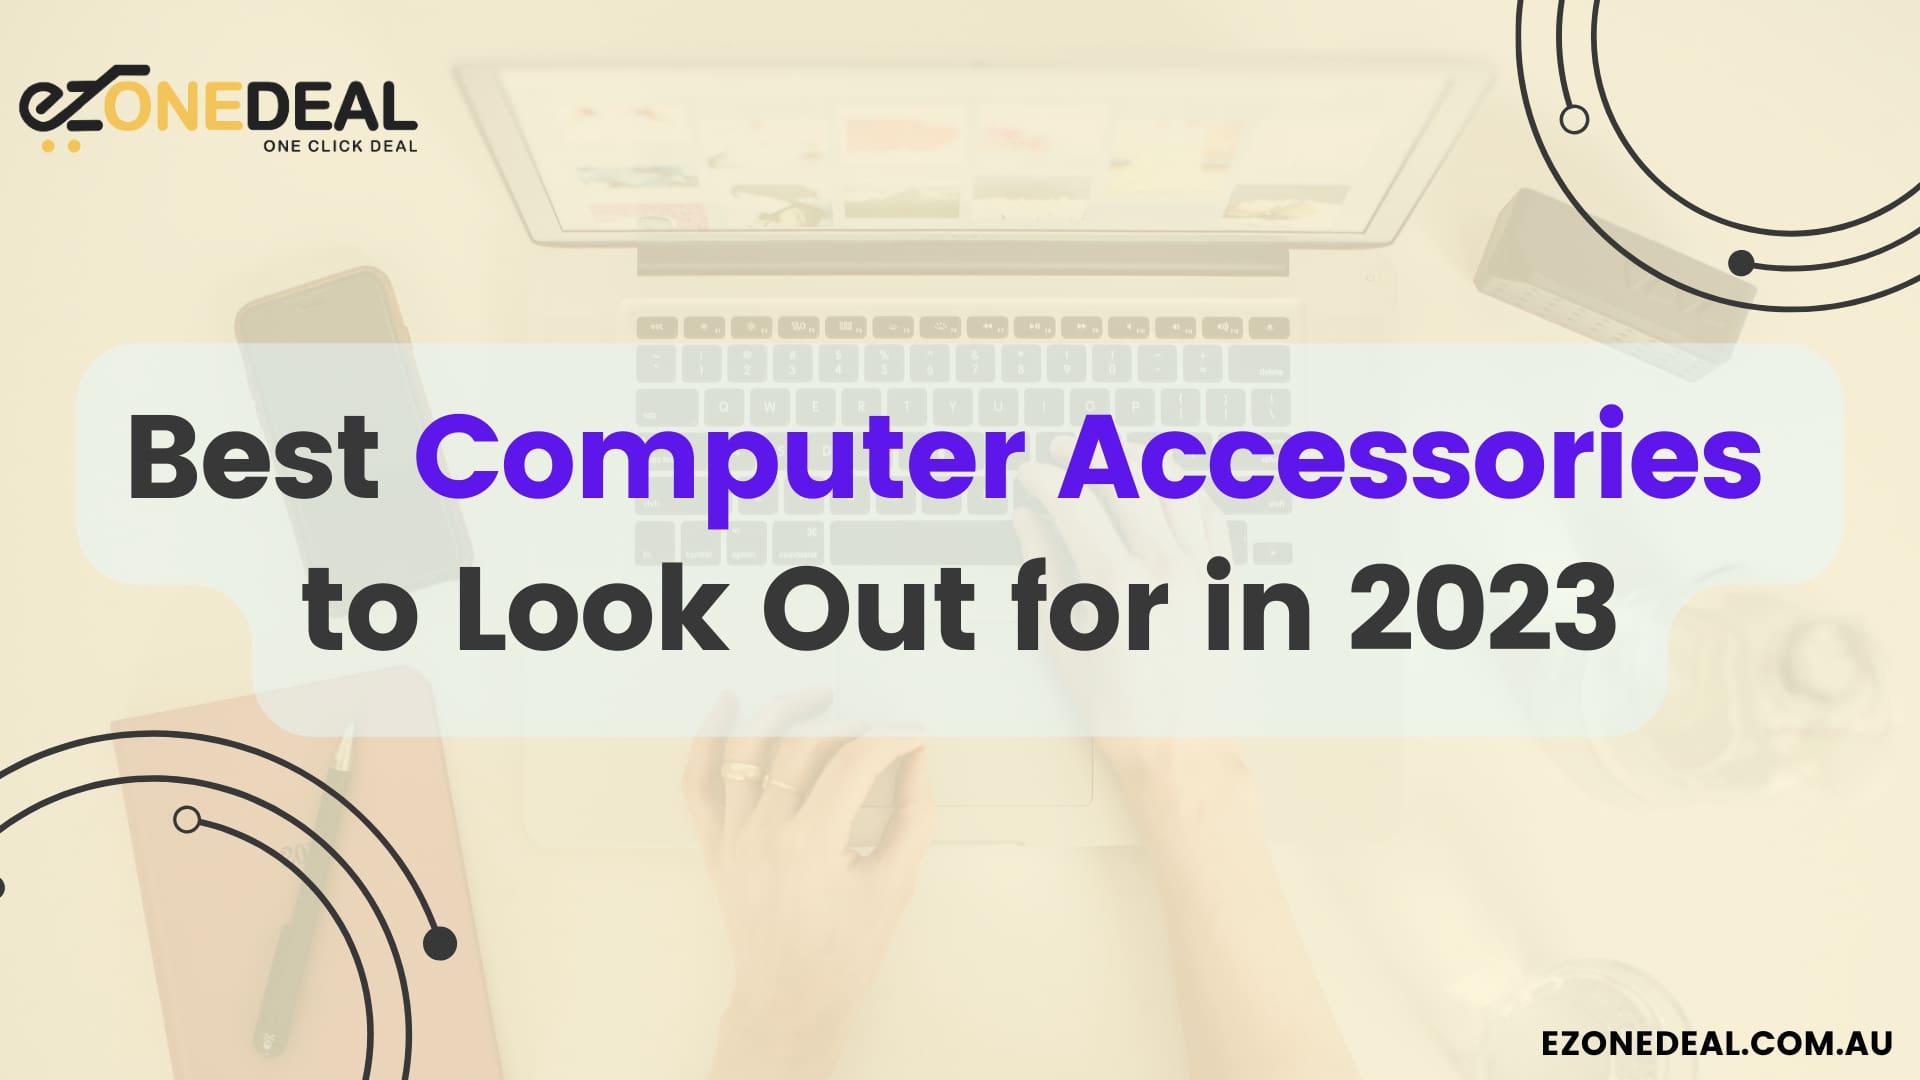 Best Computer Accessories to Look Out for in 2023